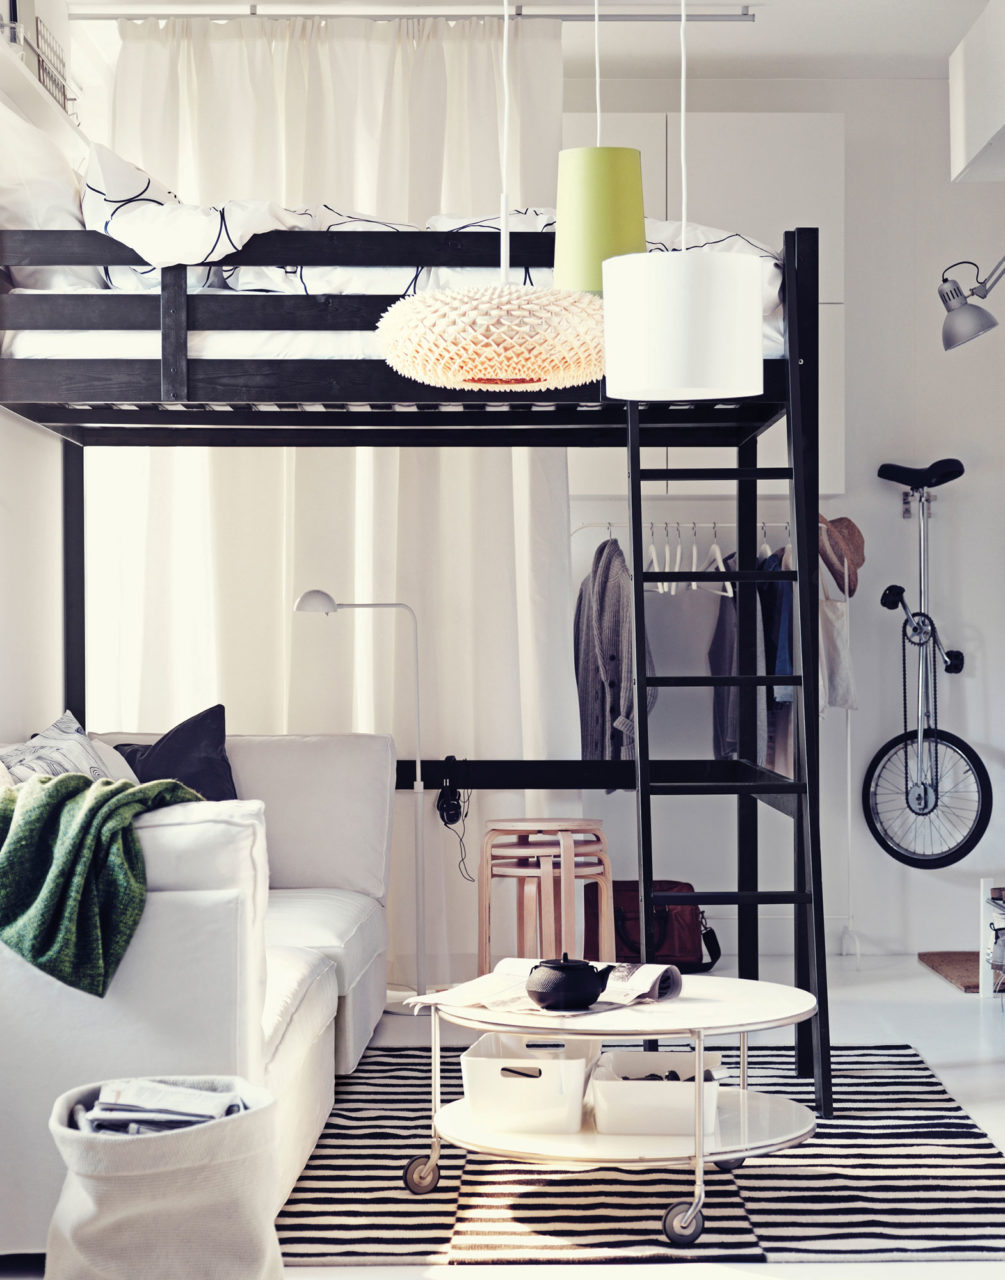 A light room with a white sofa standing under a high, black loft bed in a light style. Clothes and a unicycle are hanging on the wall.